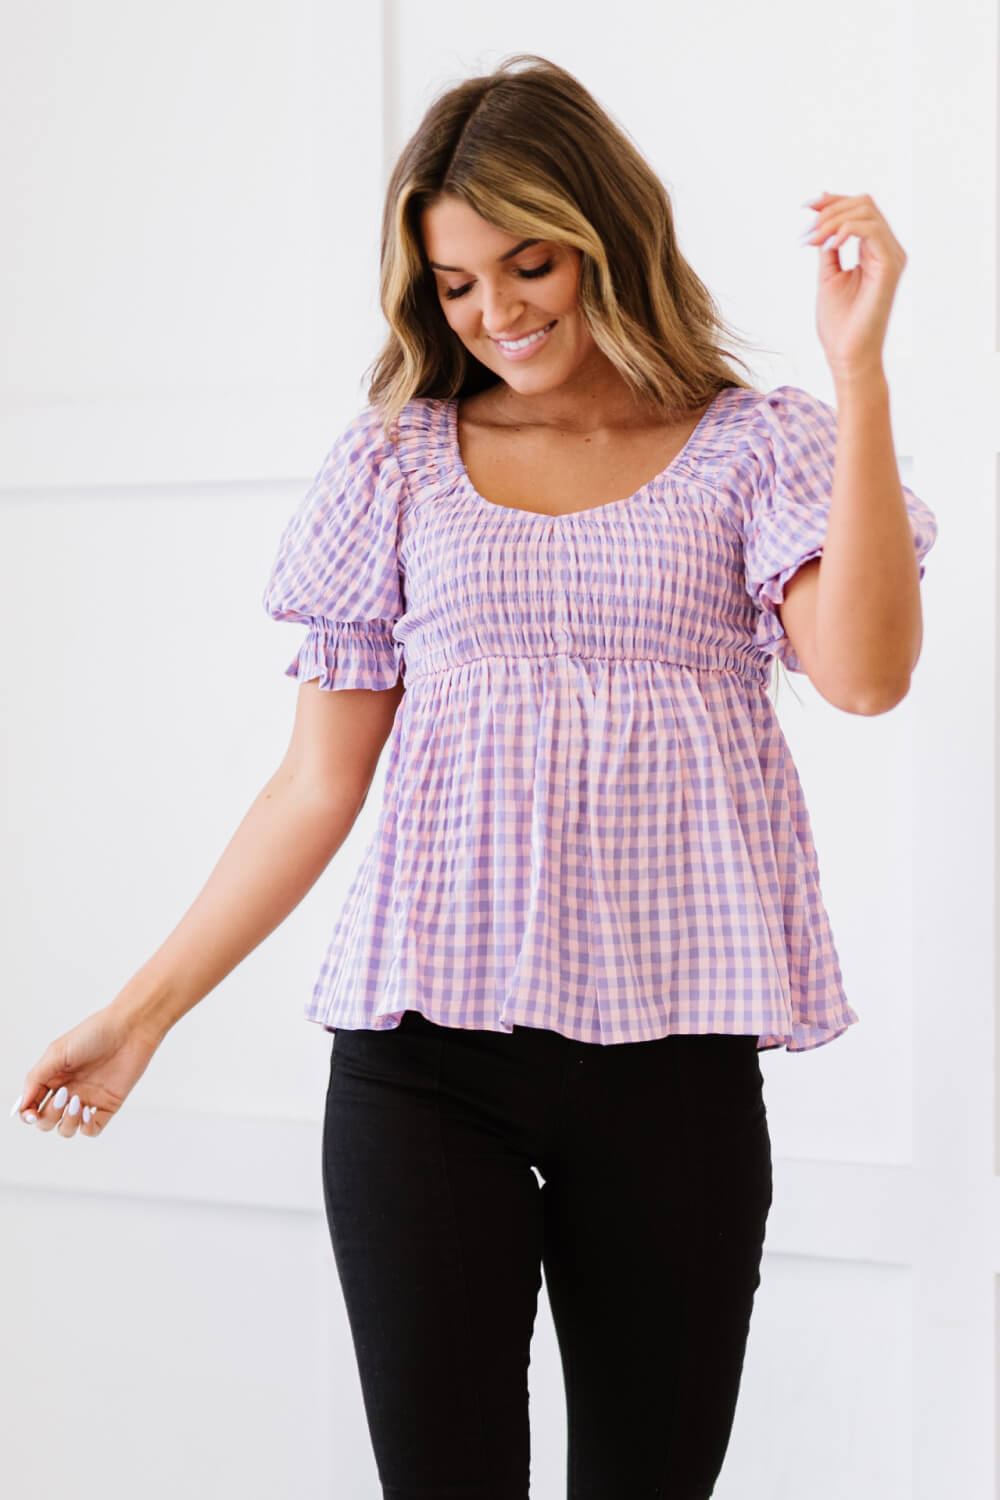 Youthful Days Full Size Run Gingham Smocked Babydoll Top